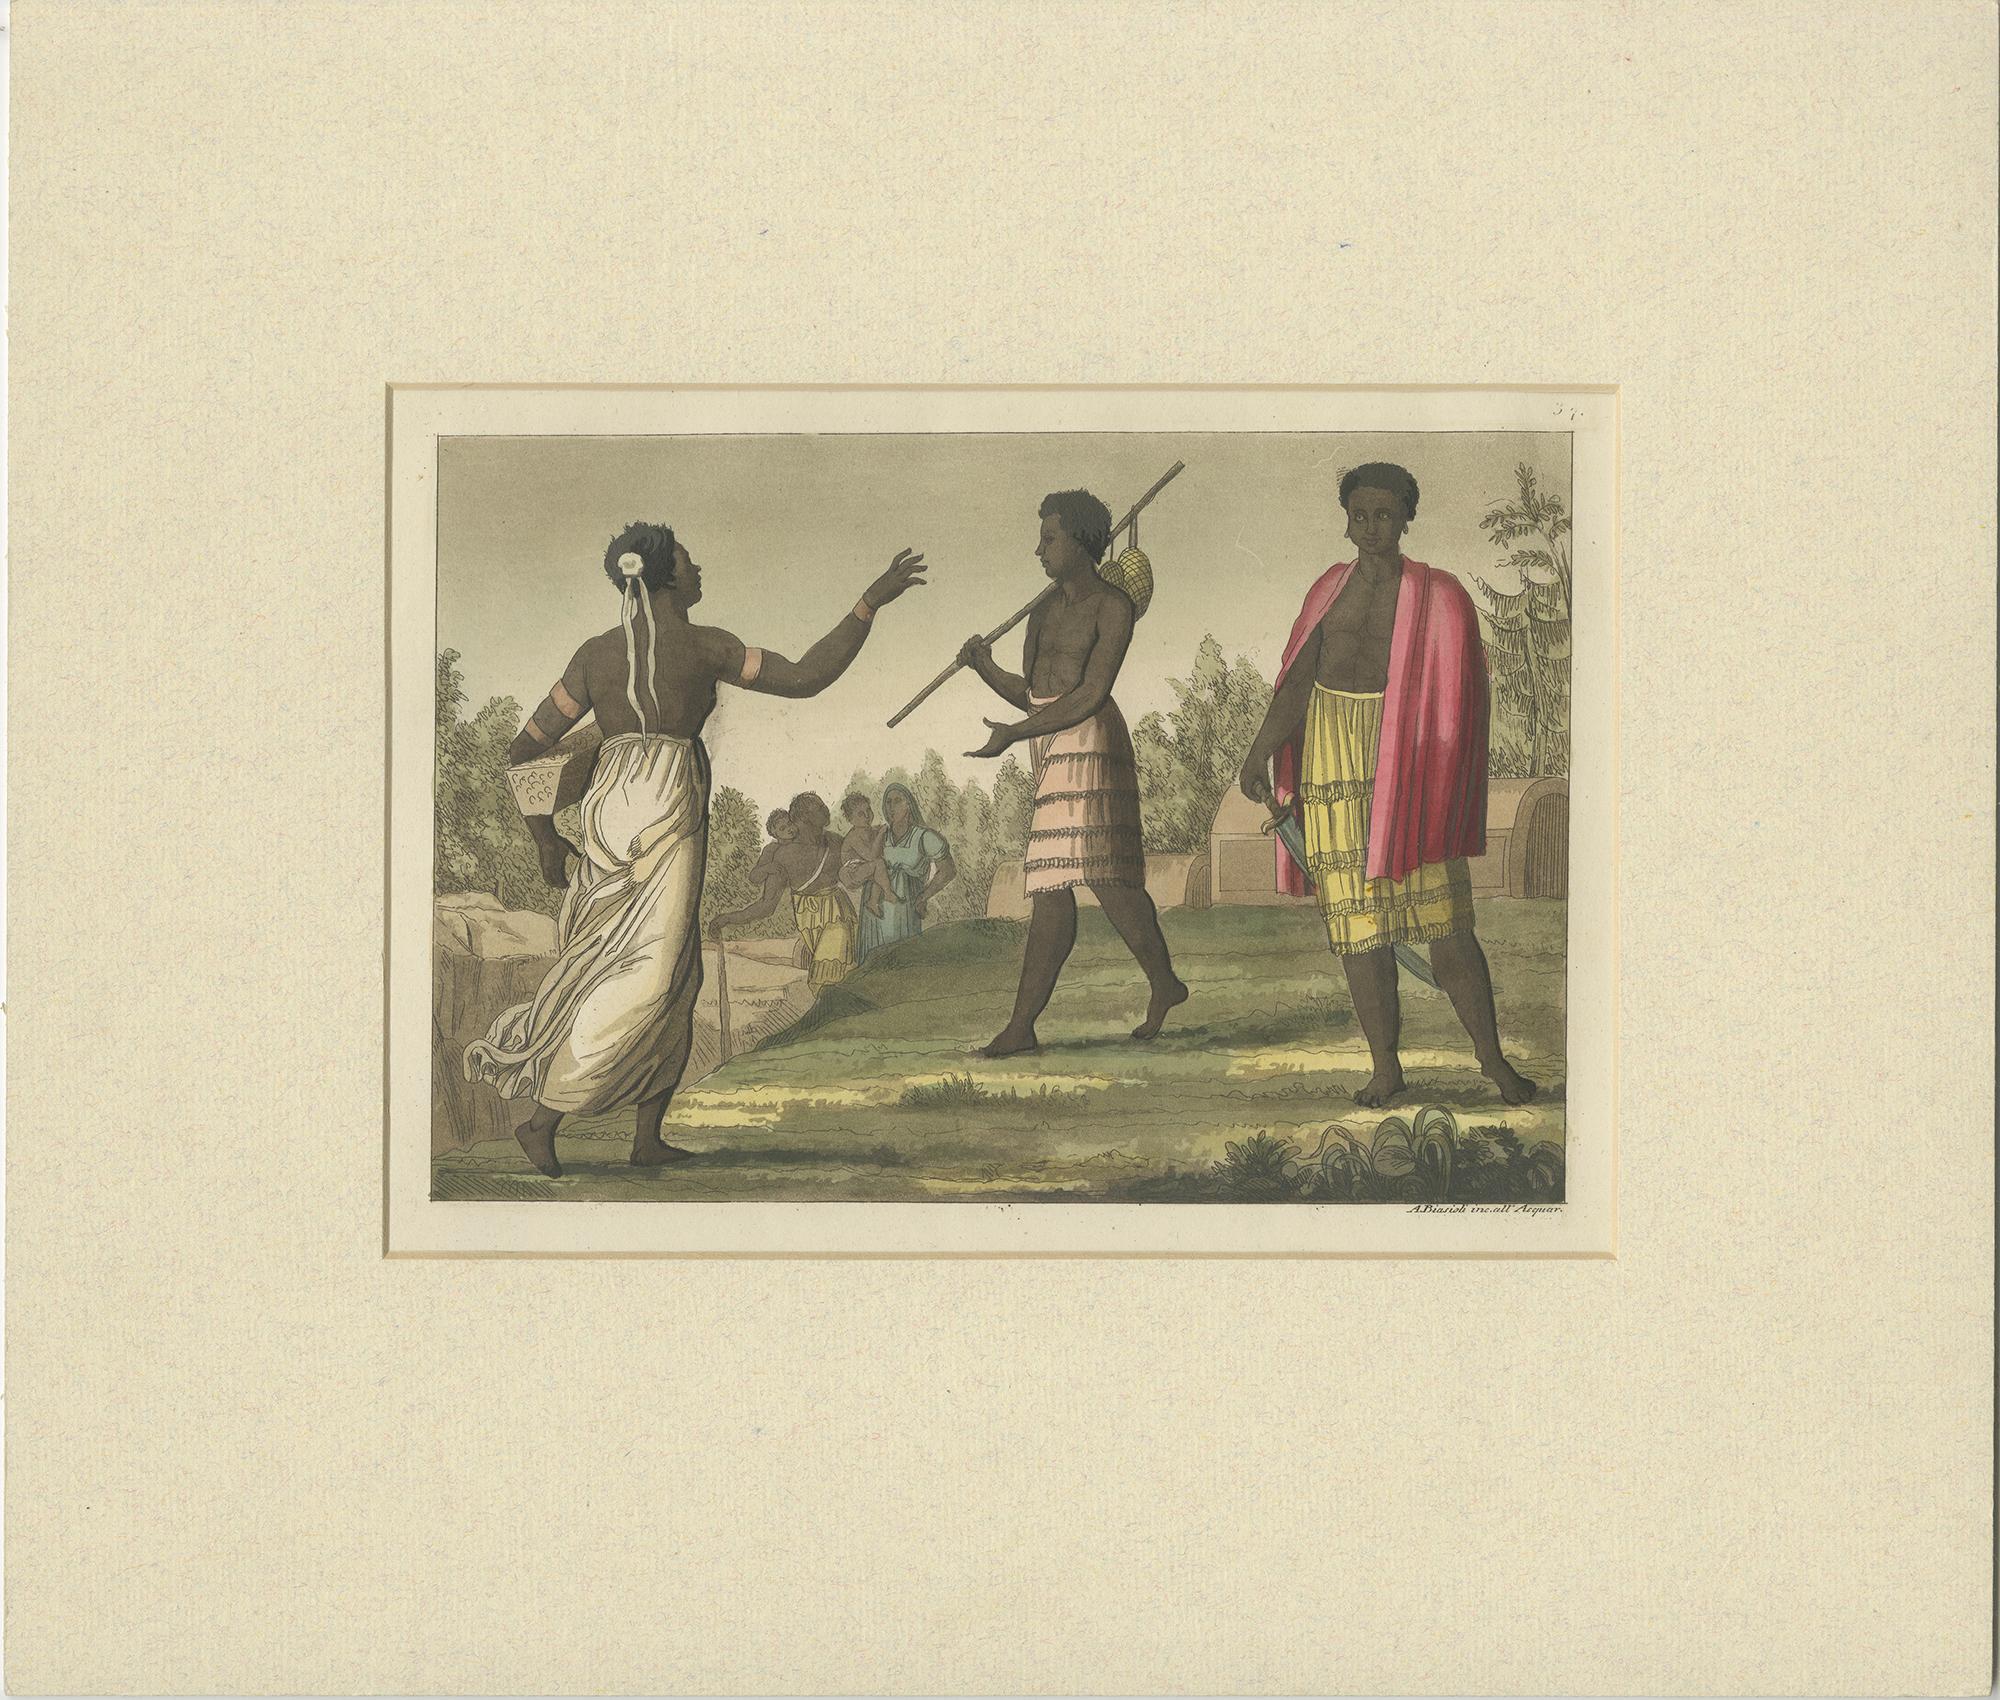 Set of three antique prints with natives of Africa. These prints originate from 'Il costume antico e moderno di tutti i popoli dell' Africa' by G. Ferrario. Published 1819.